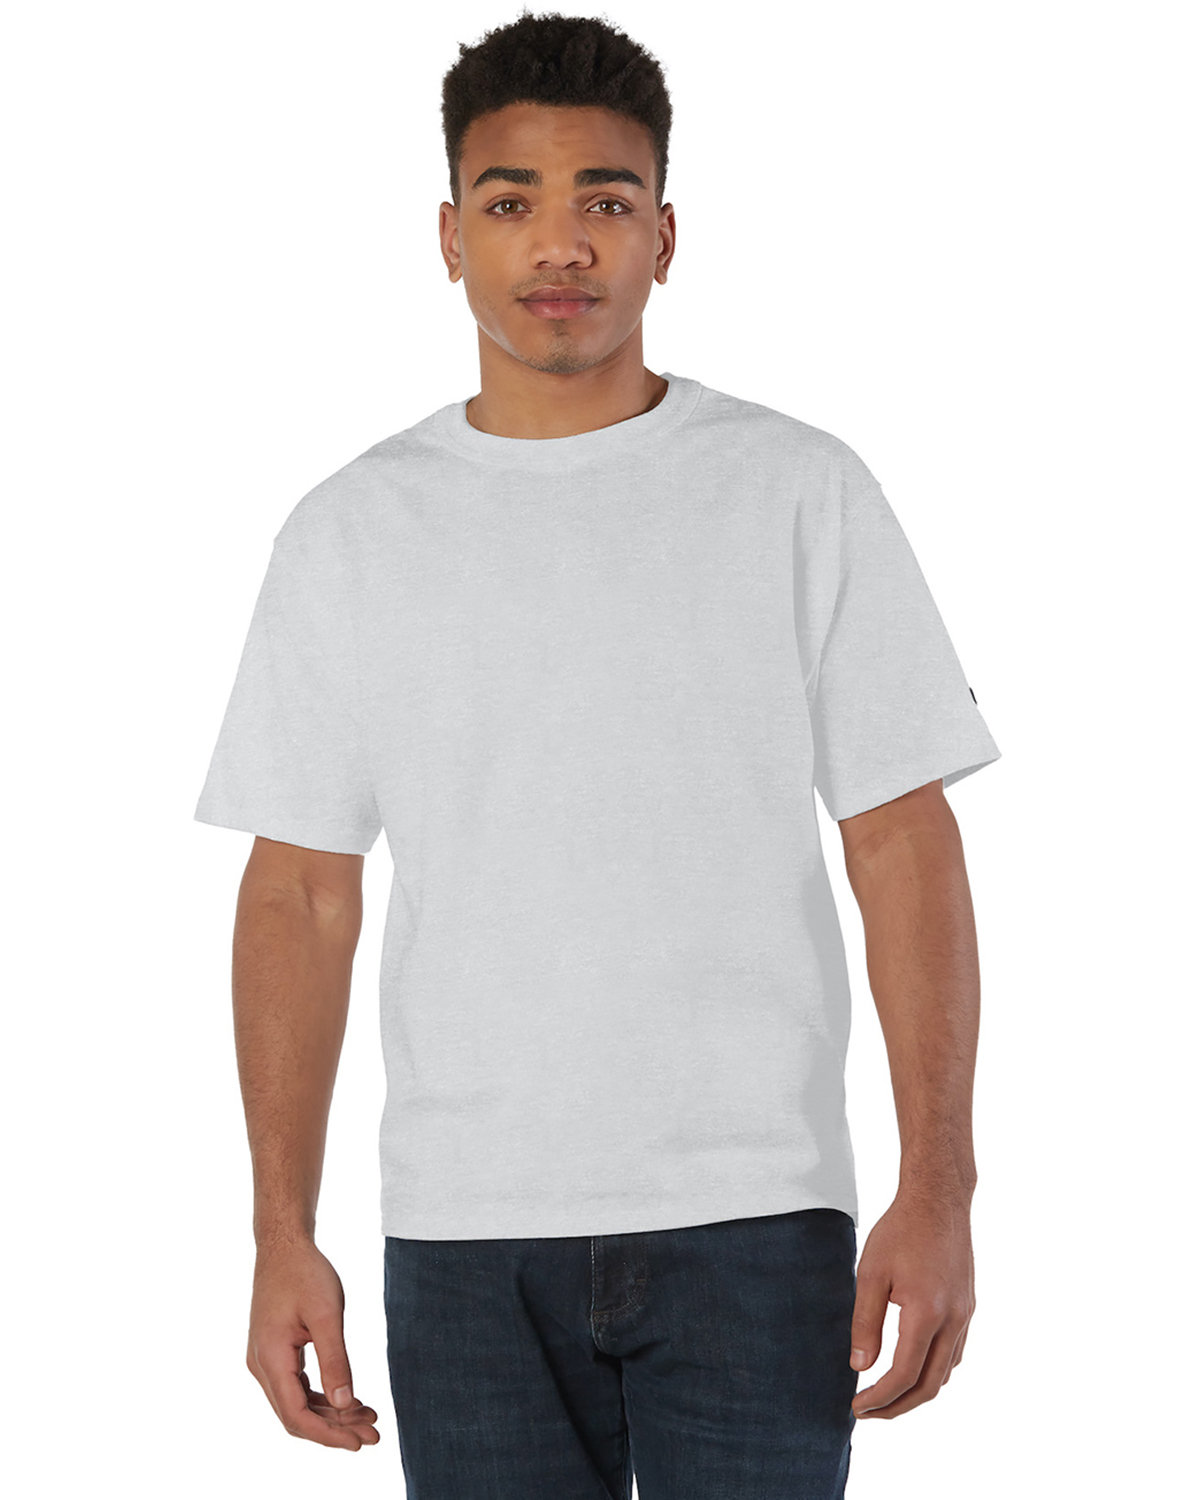 Champion 7 oz., Adult Heritage Jersey T-Shirt silver gray 